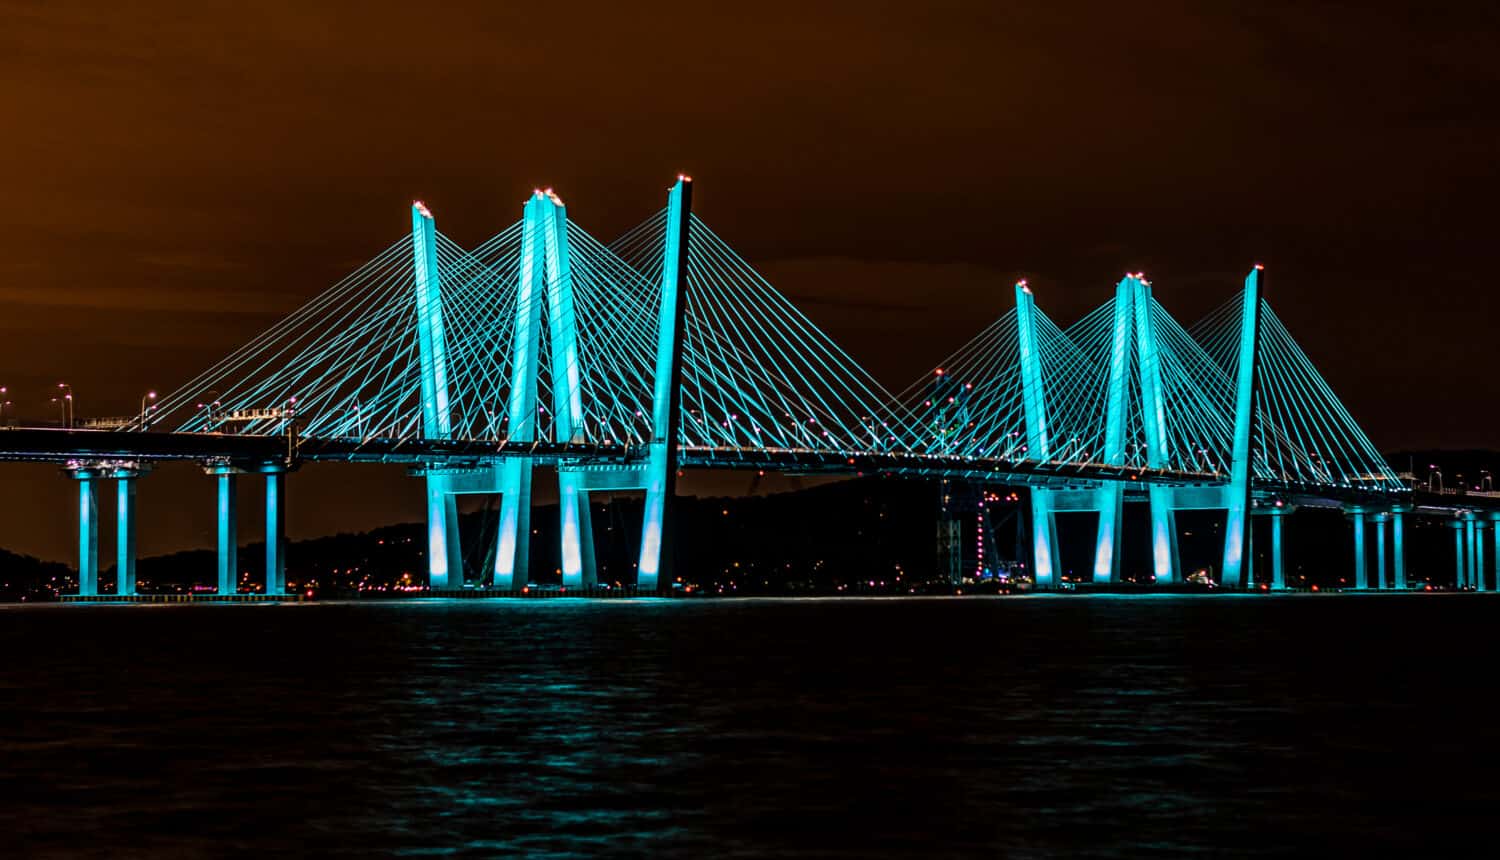 View of the Governor Mario M. Cuomo Bridge (new Tappan Zee Bridge) at night from Pierson Park in Tarrytown, NY.   The bridge is colored in a beautiful blue green hue with a fiery night sky.